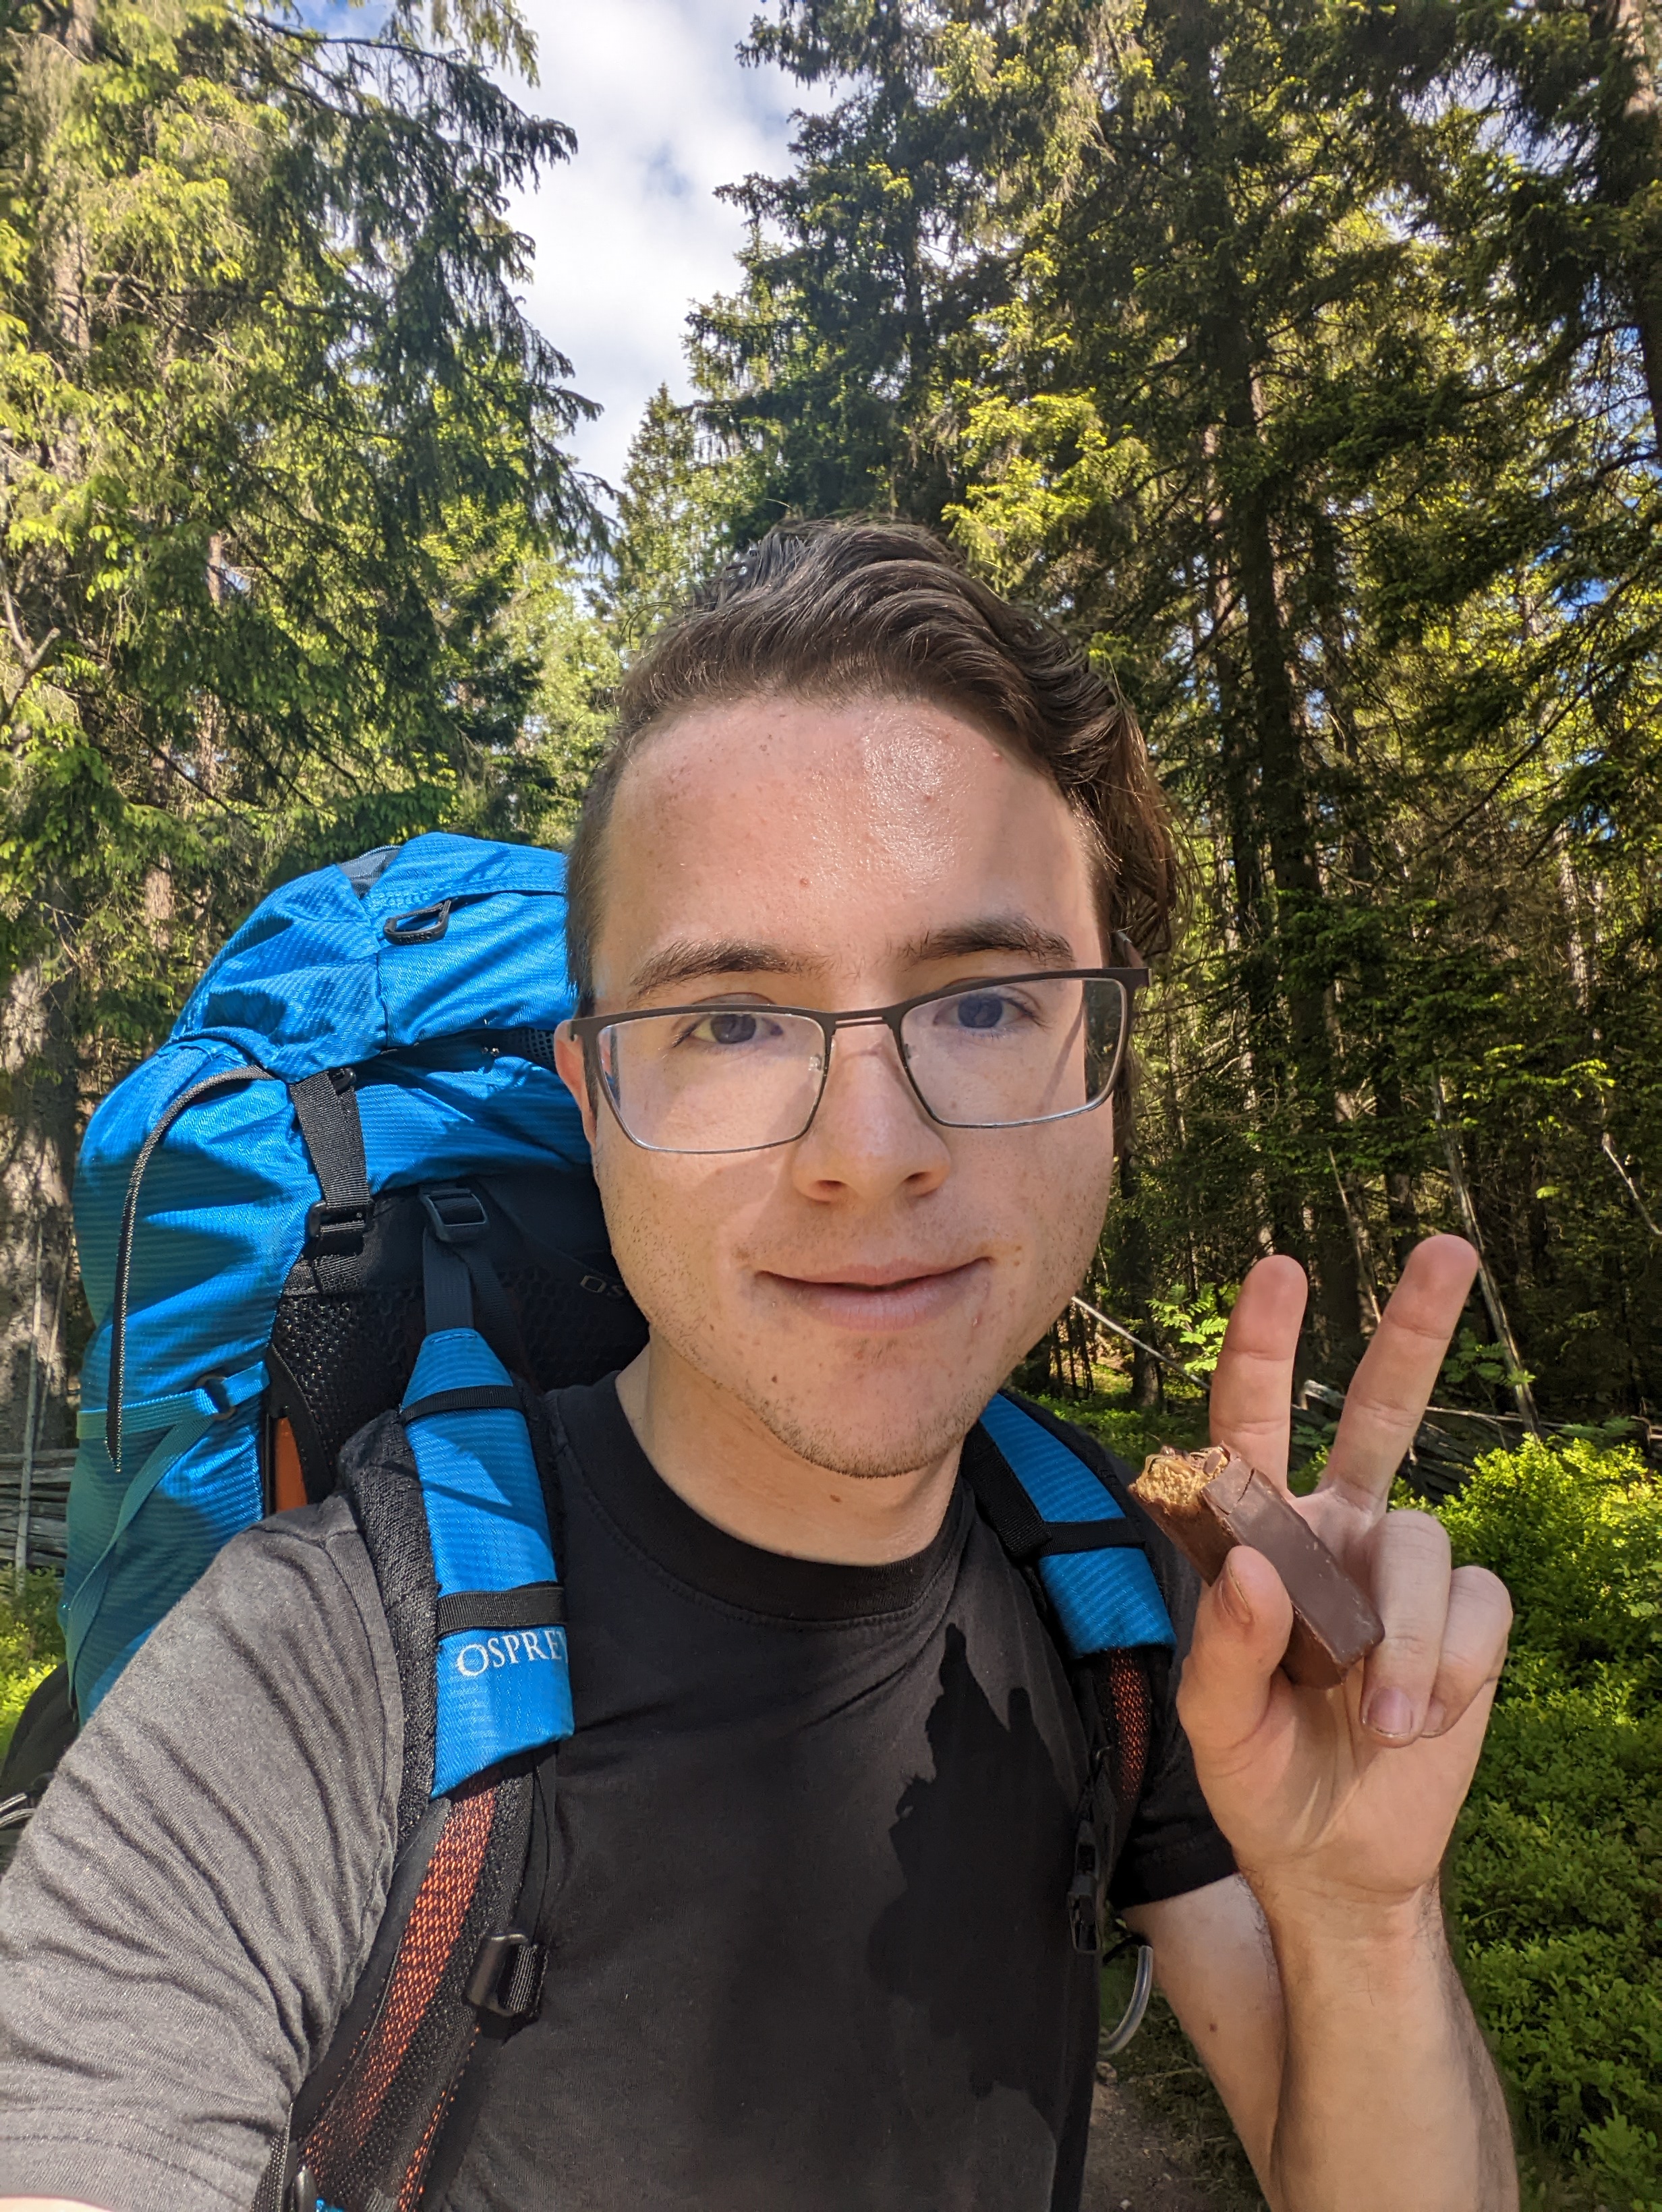 Photo of me, Wesley Aptekar-Cassels, wearing a backpacking backpack, making a peace sign, and holding a energy bar.